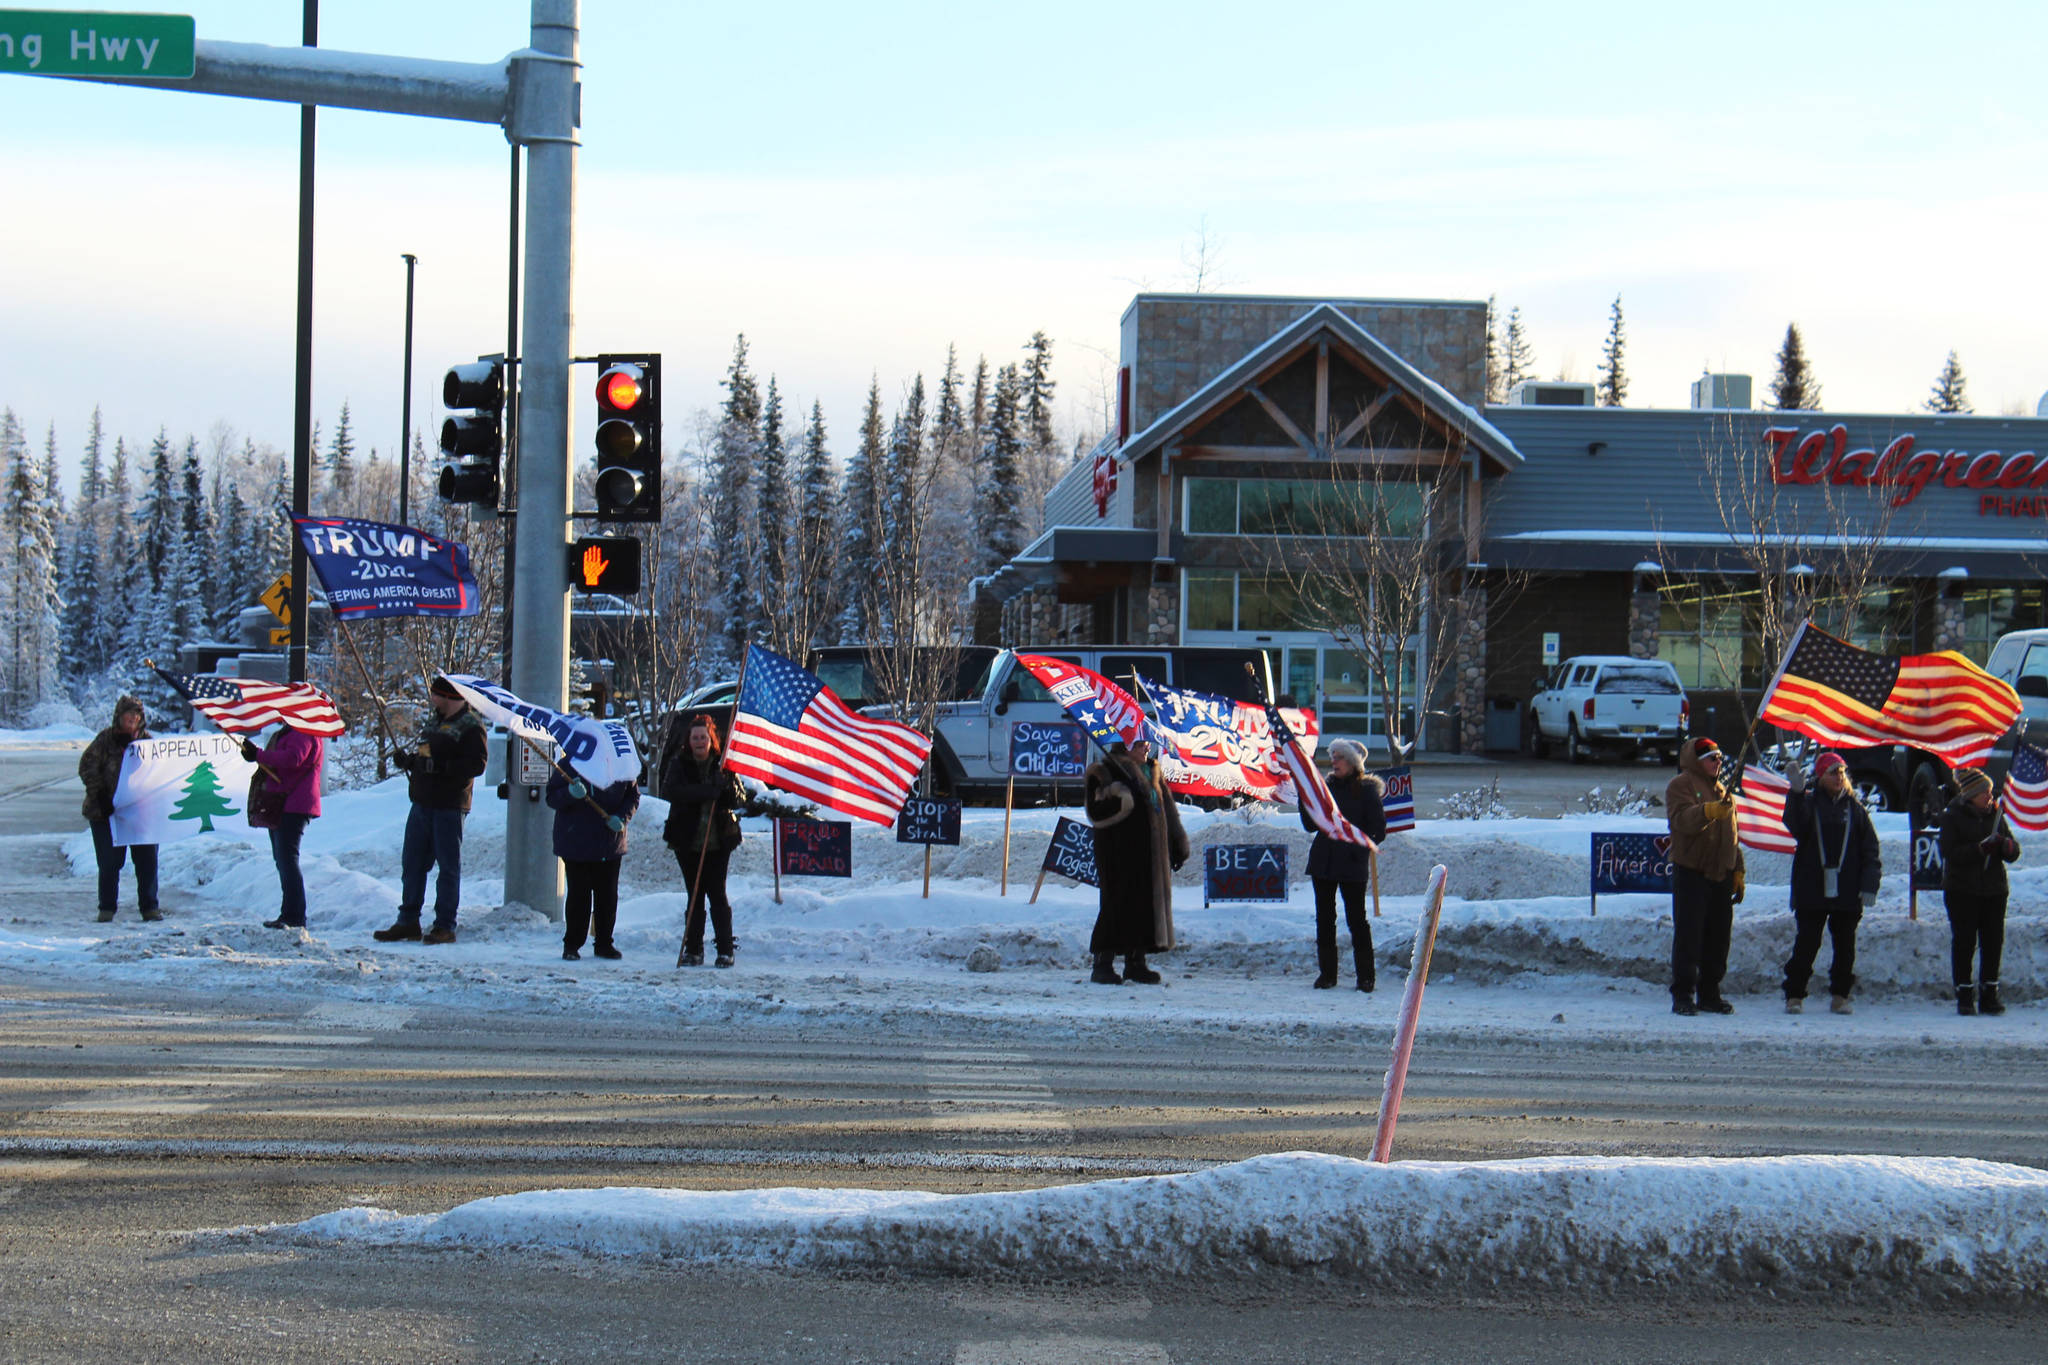 Demonstrators gather at the intersection of Kenai Spur and Sterling higways on Wednesday, Jan. 6 in Soldotna, Alaska. (Ashlyn O’Hara/Peninsula Clarion)